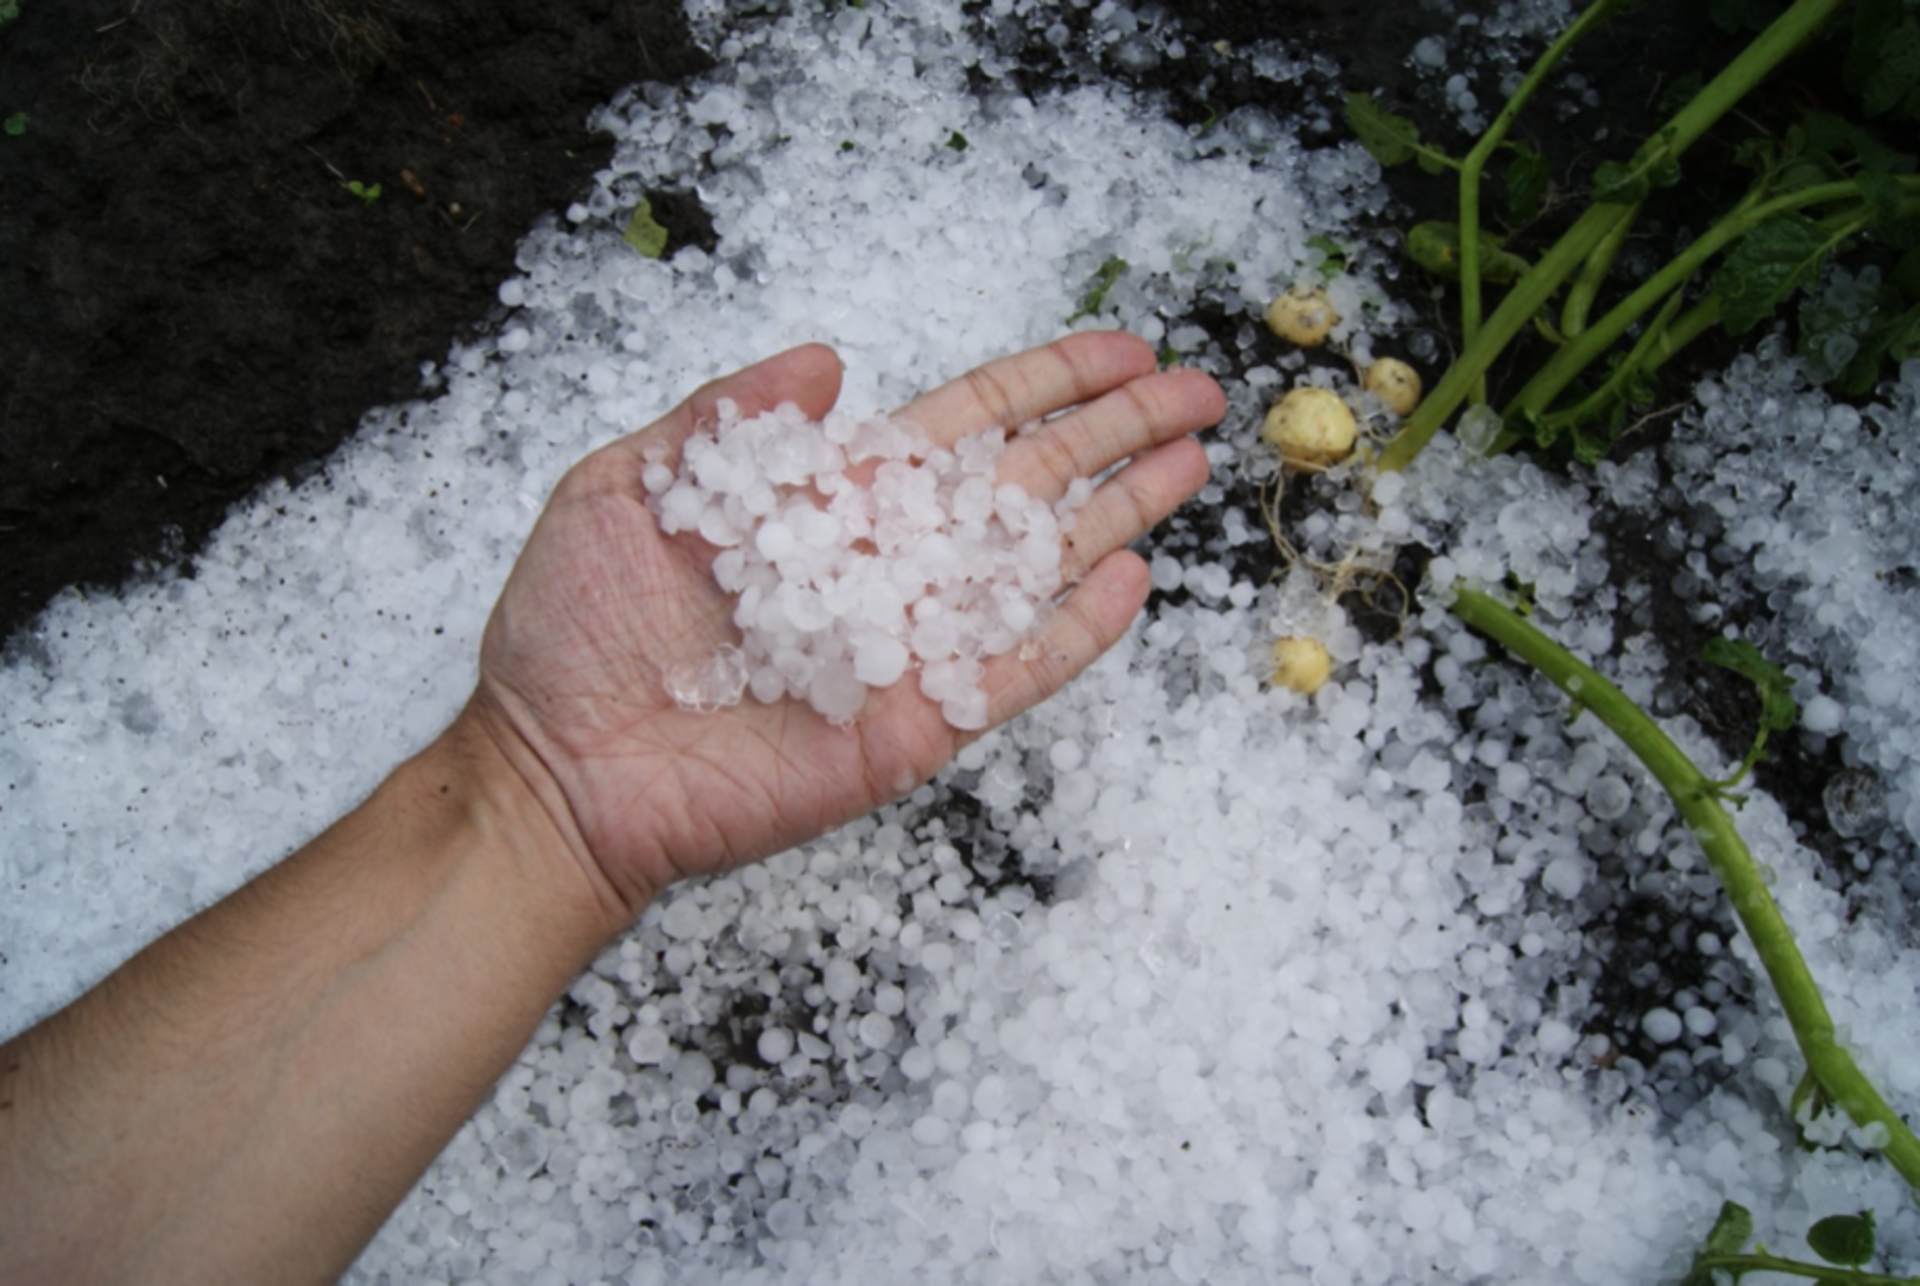 New ‘disdrometers’ in Calgary will help forecast the next big hailstorm